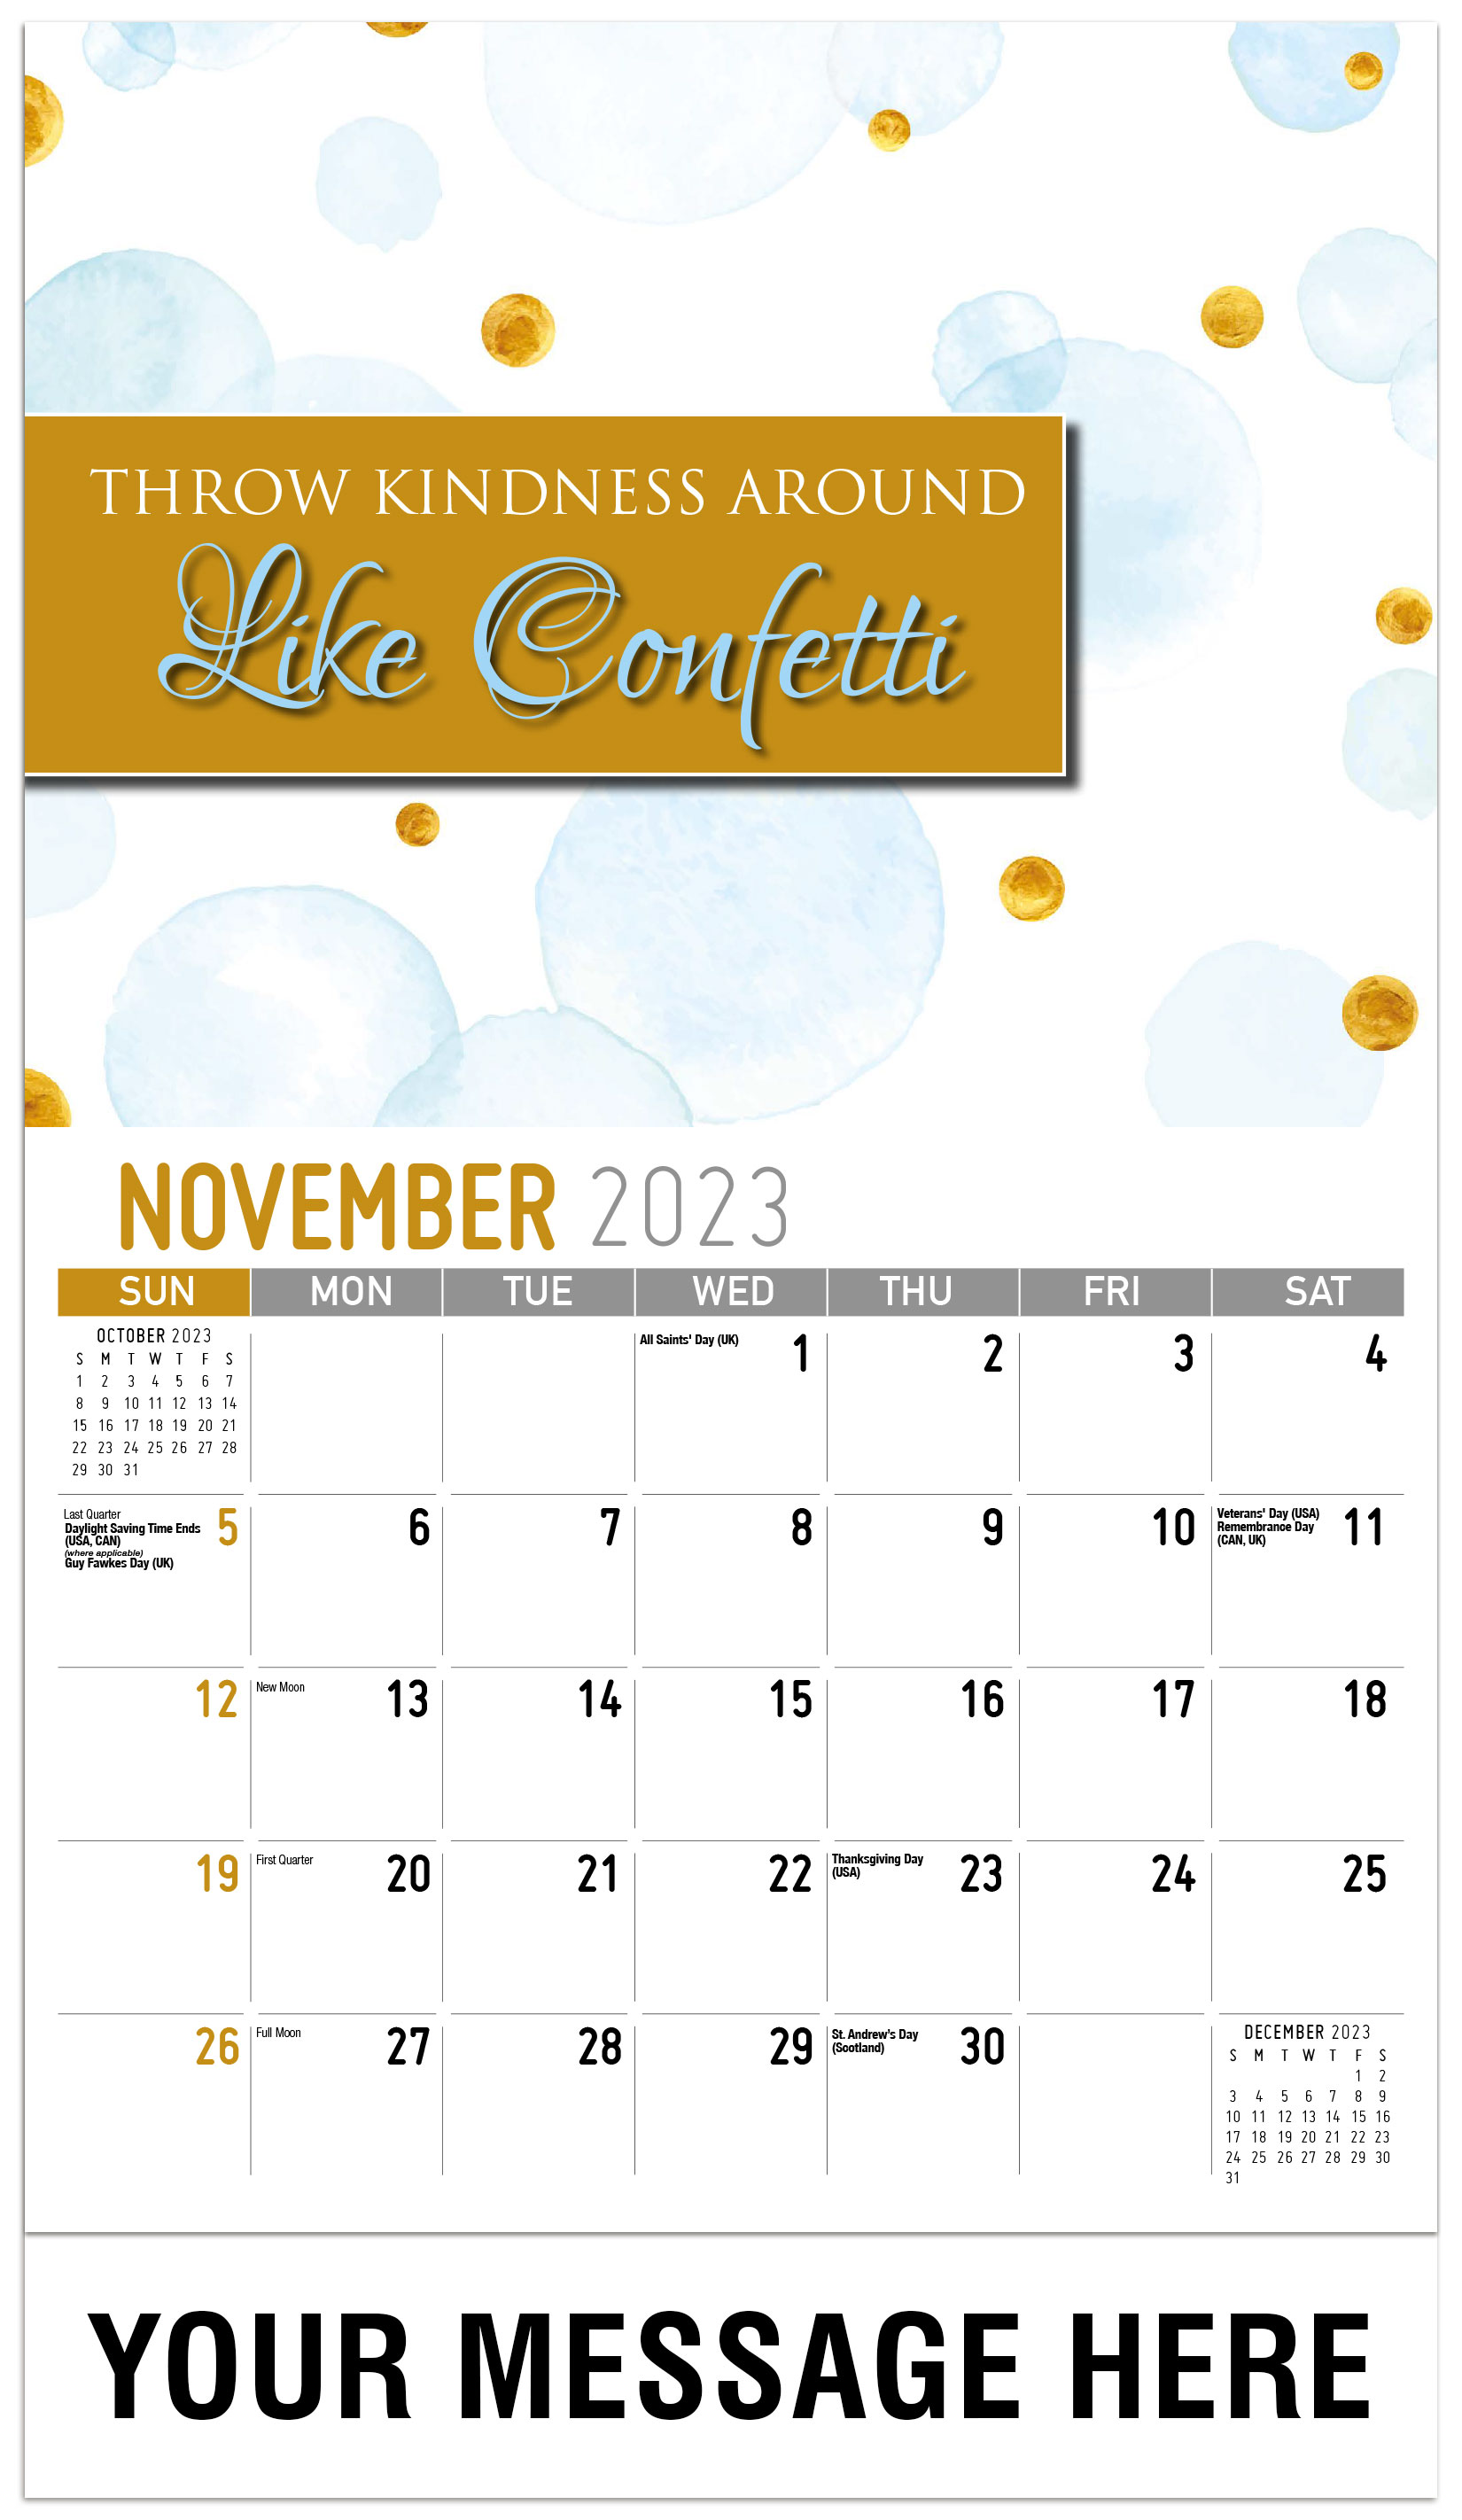 Throw Kindness Around 
Like Confetti - November - Arts and Thoughts 2023 Promotional Calendar